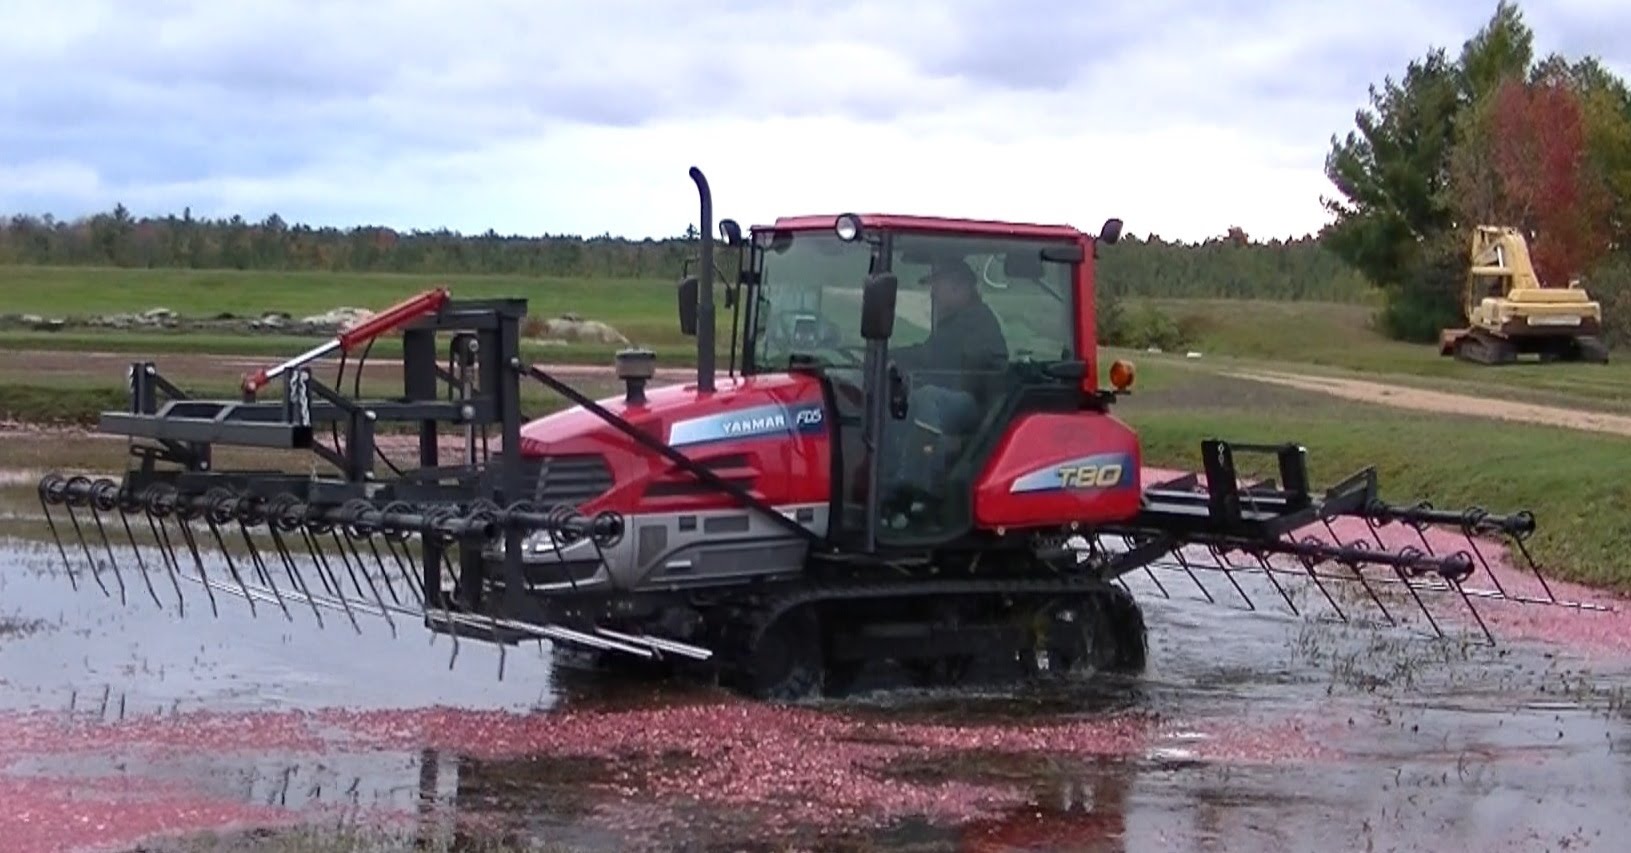 Yanmar T80 Crawler Tracked Tractor Knocking off Cranberries - YouTube